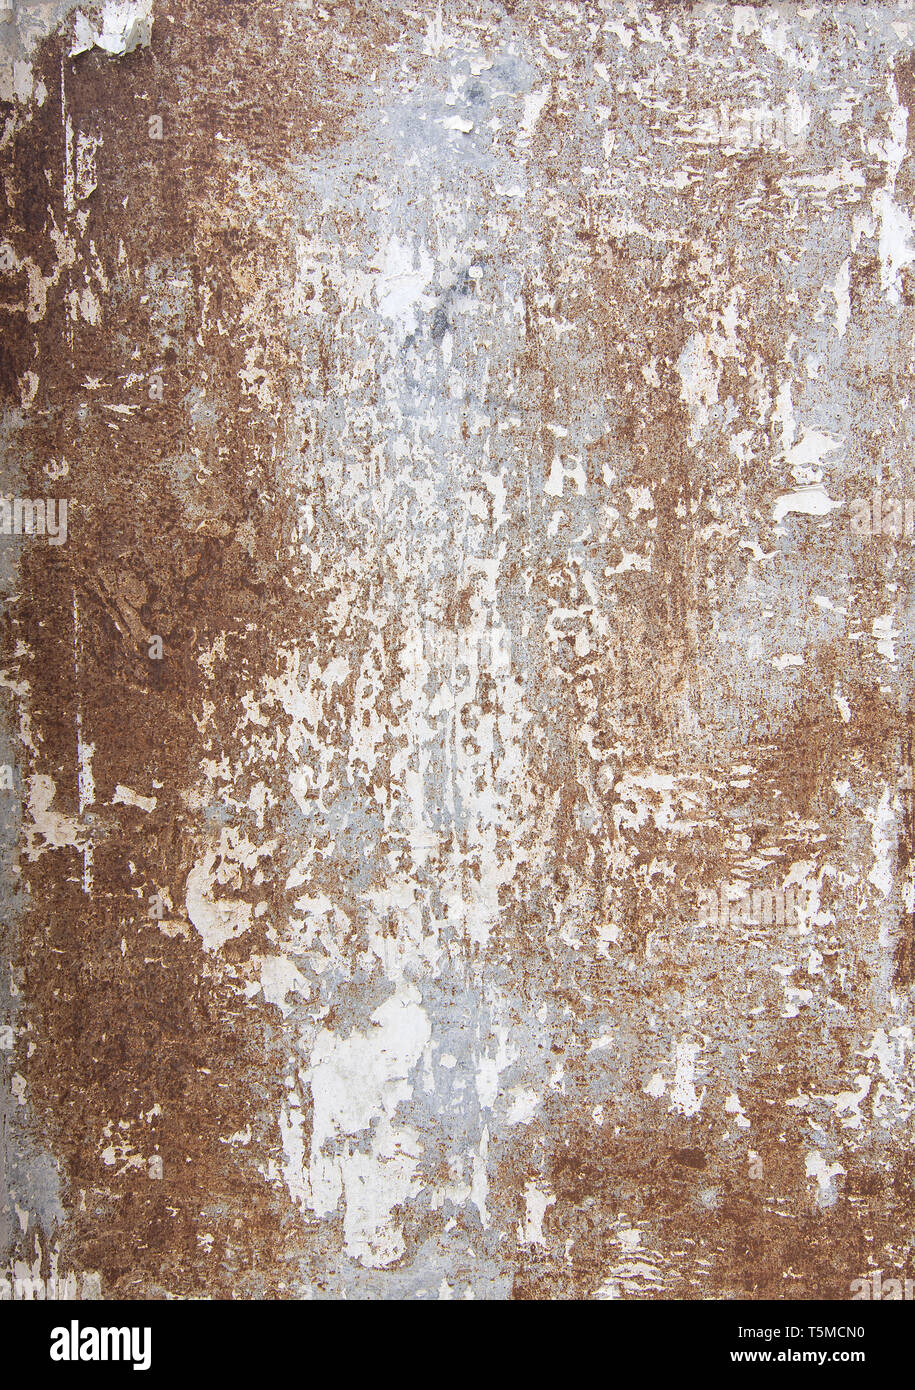 Rustic grungy bohemian shabby chic wall surface, aged vintage retro background texture Stock Photo